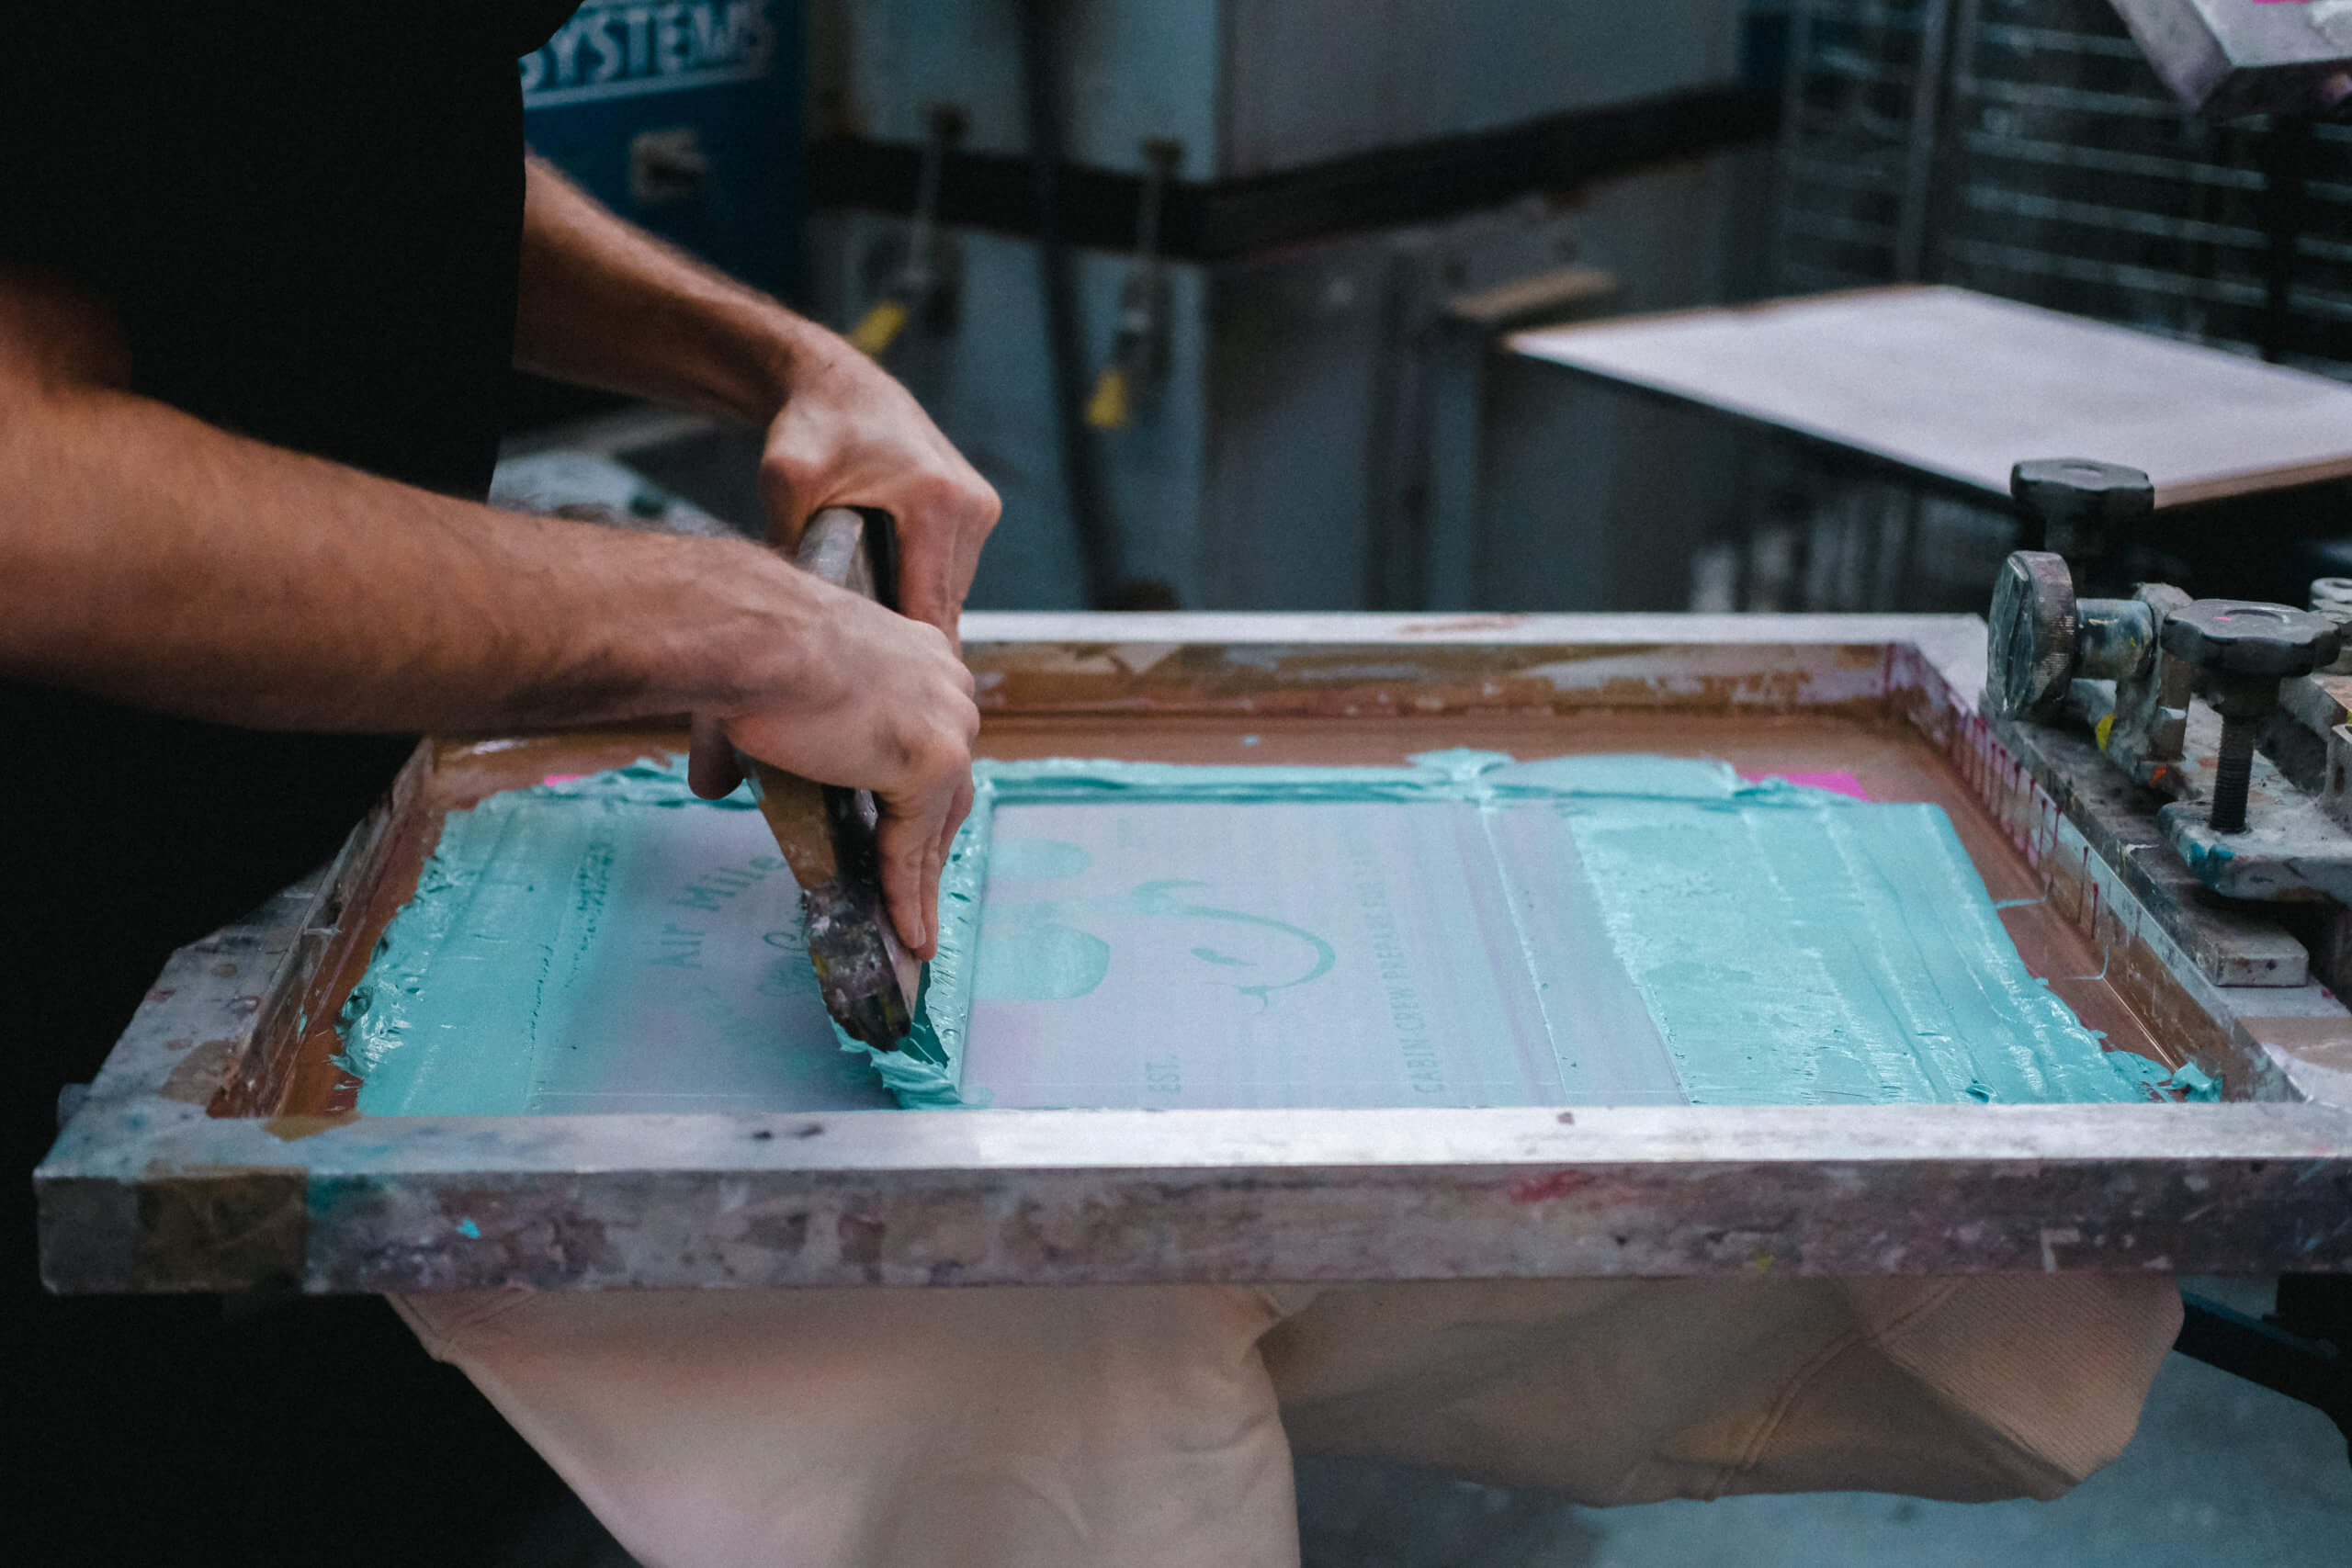 Maual screen printing in action